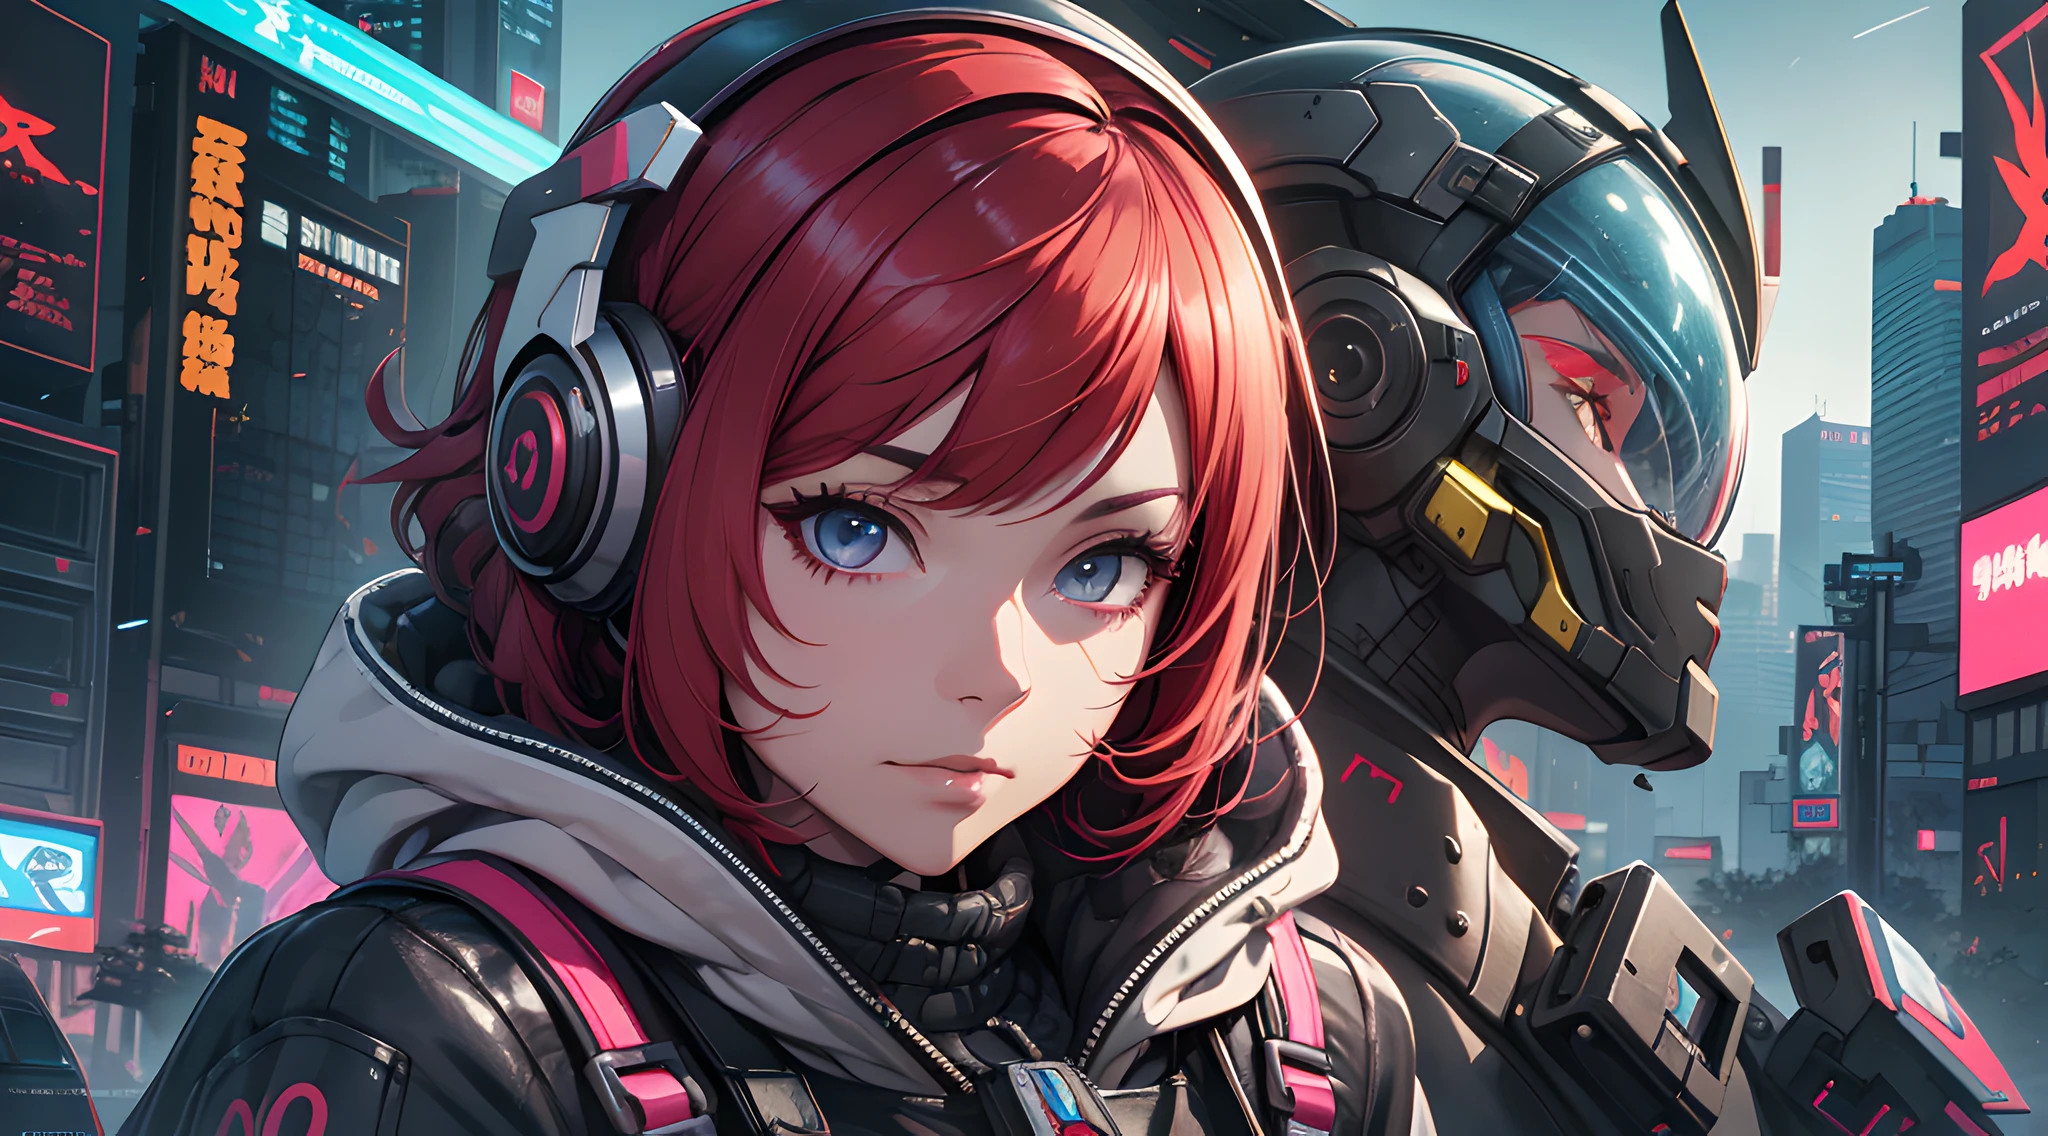 a close up of a person with red hair and a helmet, cyberpunk anime girl mech, digital cyberpunk anime art, female cyberpunk anime girl, cyberpunk anime girl in hoodie, anime cyberpunk art, girl in mecha cyber armor, cyberpunk anime art, cyberpunk anime girl, redhead female cyberpunk, modern cyberpunk anime, cyber noir, neon scales and cyborg tech, anime cyberpunk,shine metal,sharp focus,raytracing